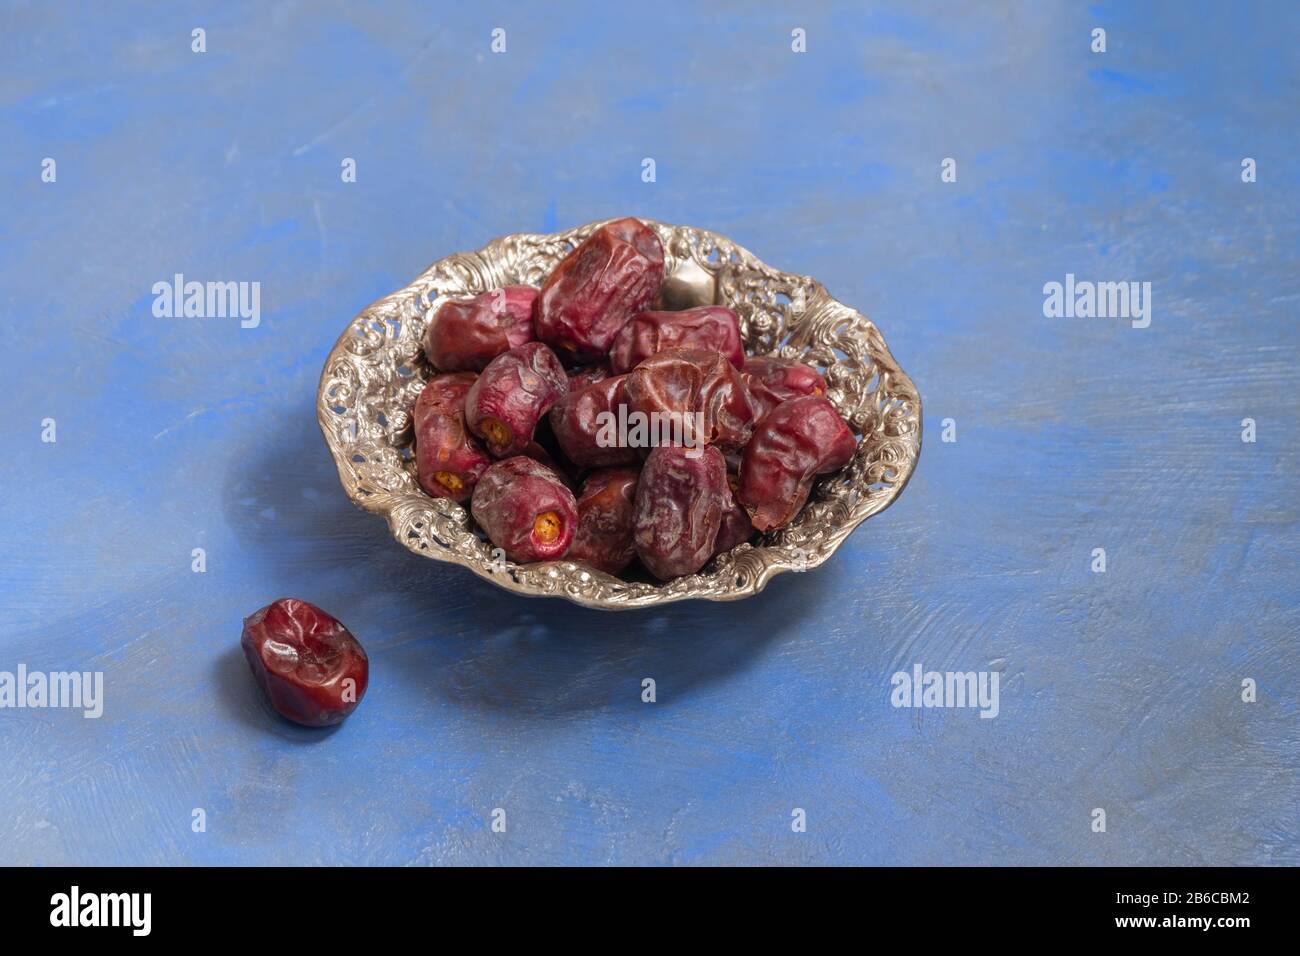 Ramadan fasting composition. Dried dates in a metallic plate on dark blue background Stock Photo